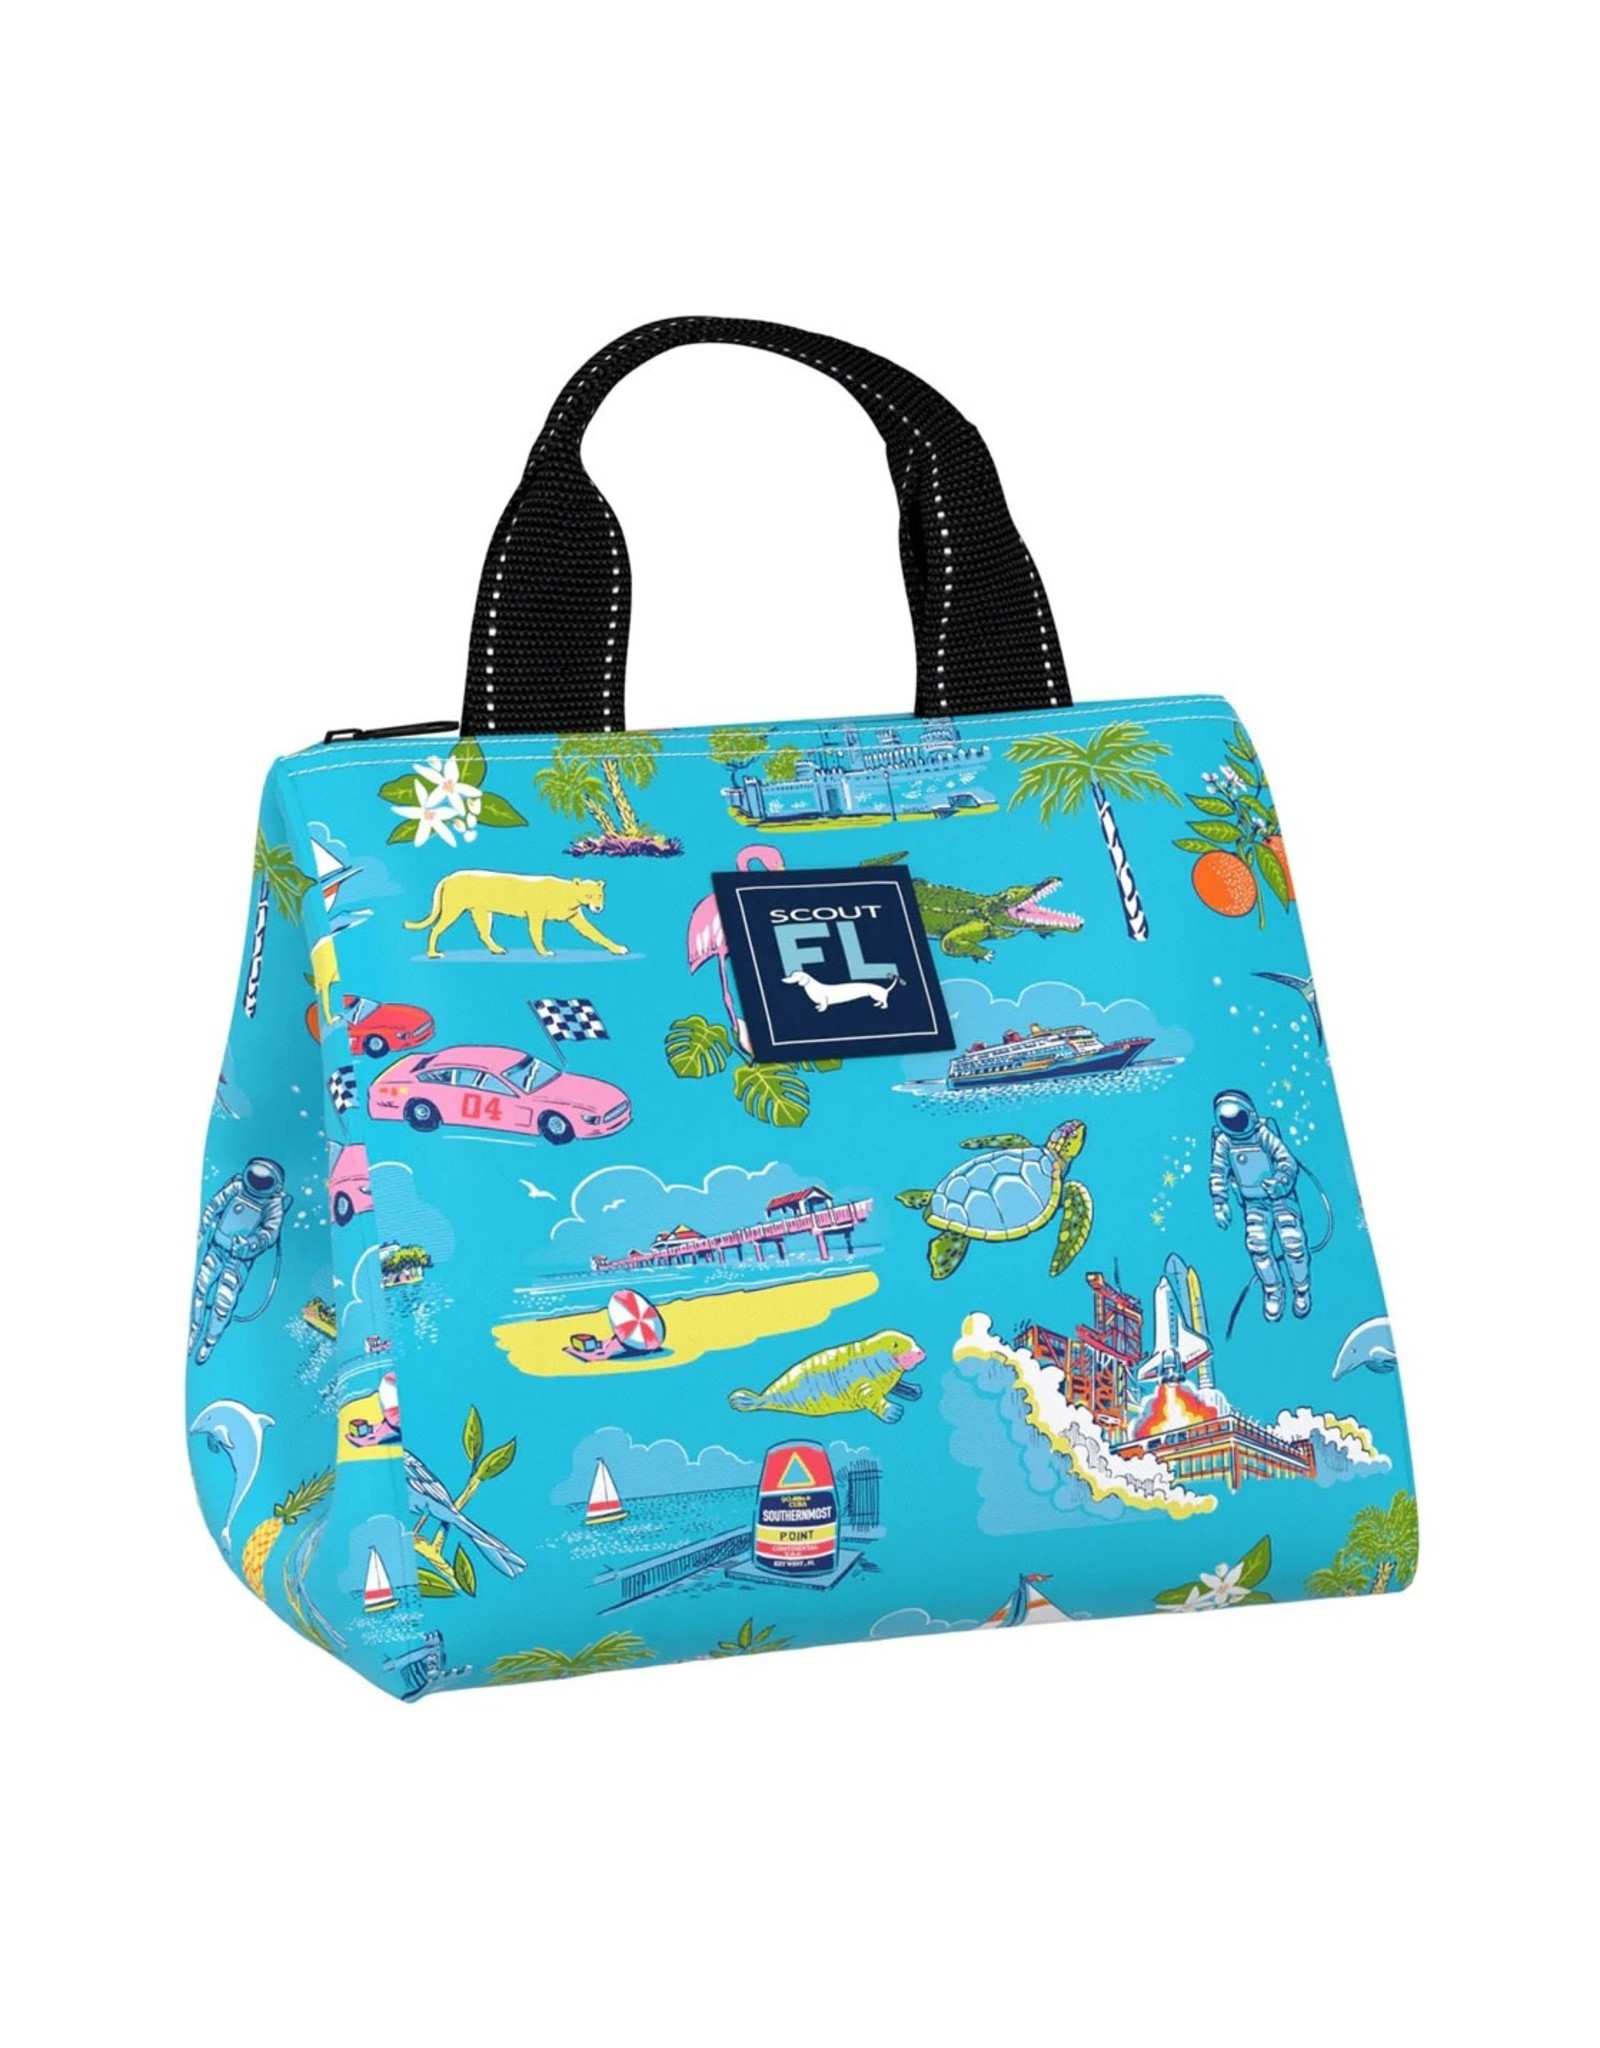 Scout Bags Eloise Lunch Box Soft Cooler Lunch Bag In Florida Pattern